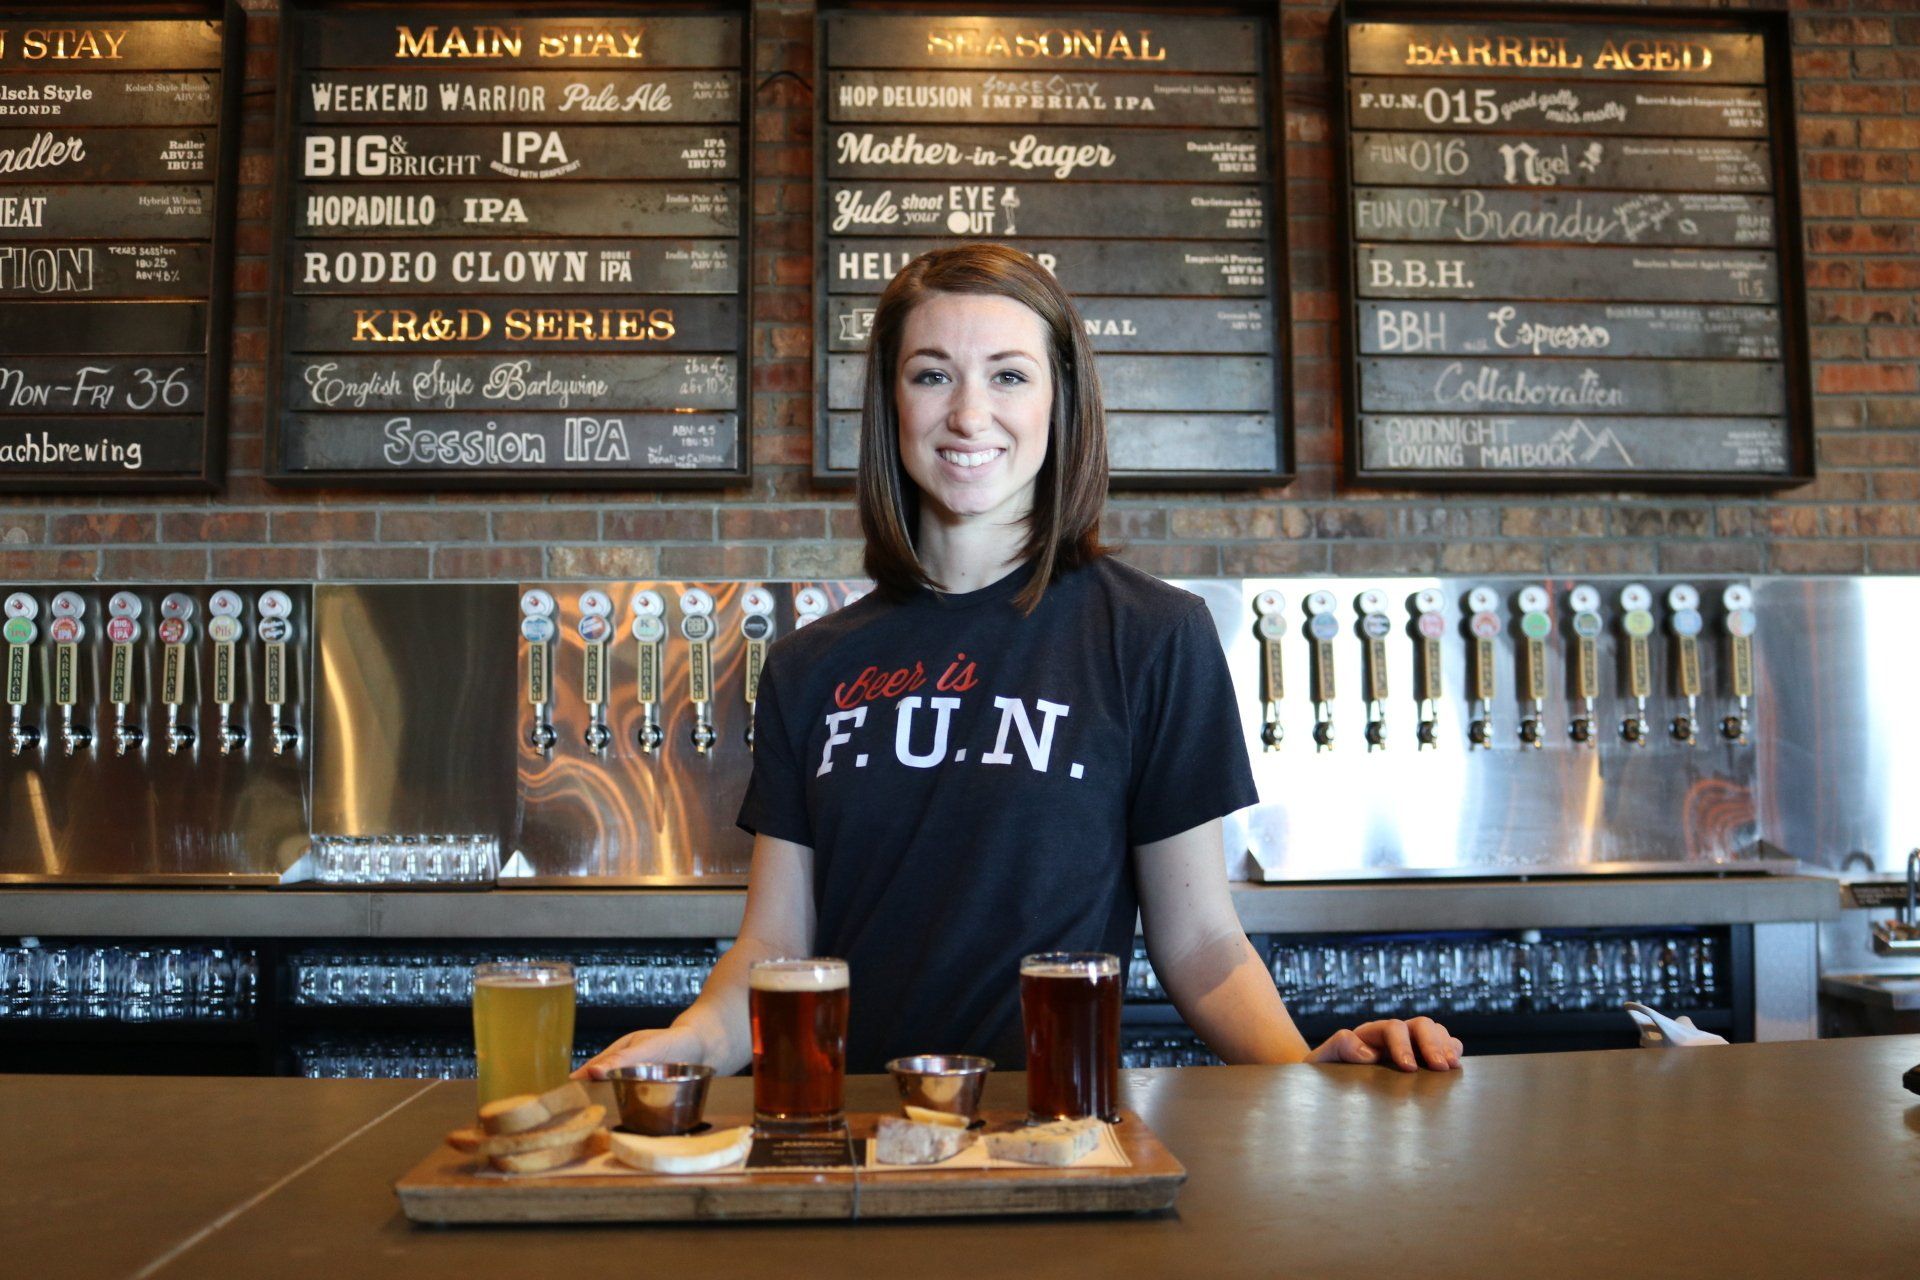 A woman wearing a shirt that says fun is standing at a bar